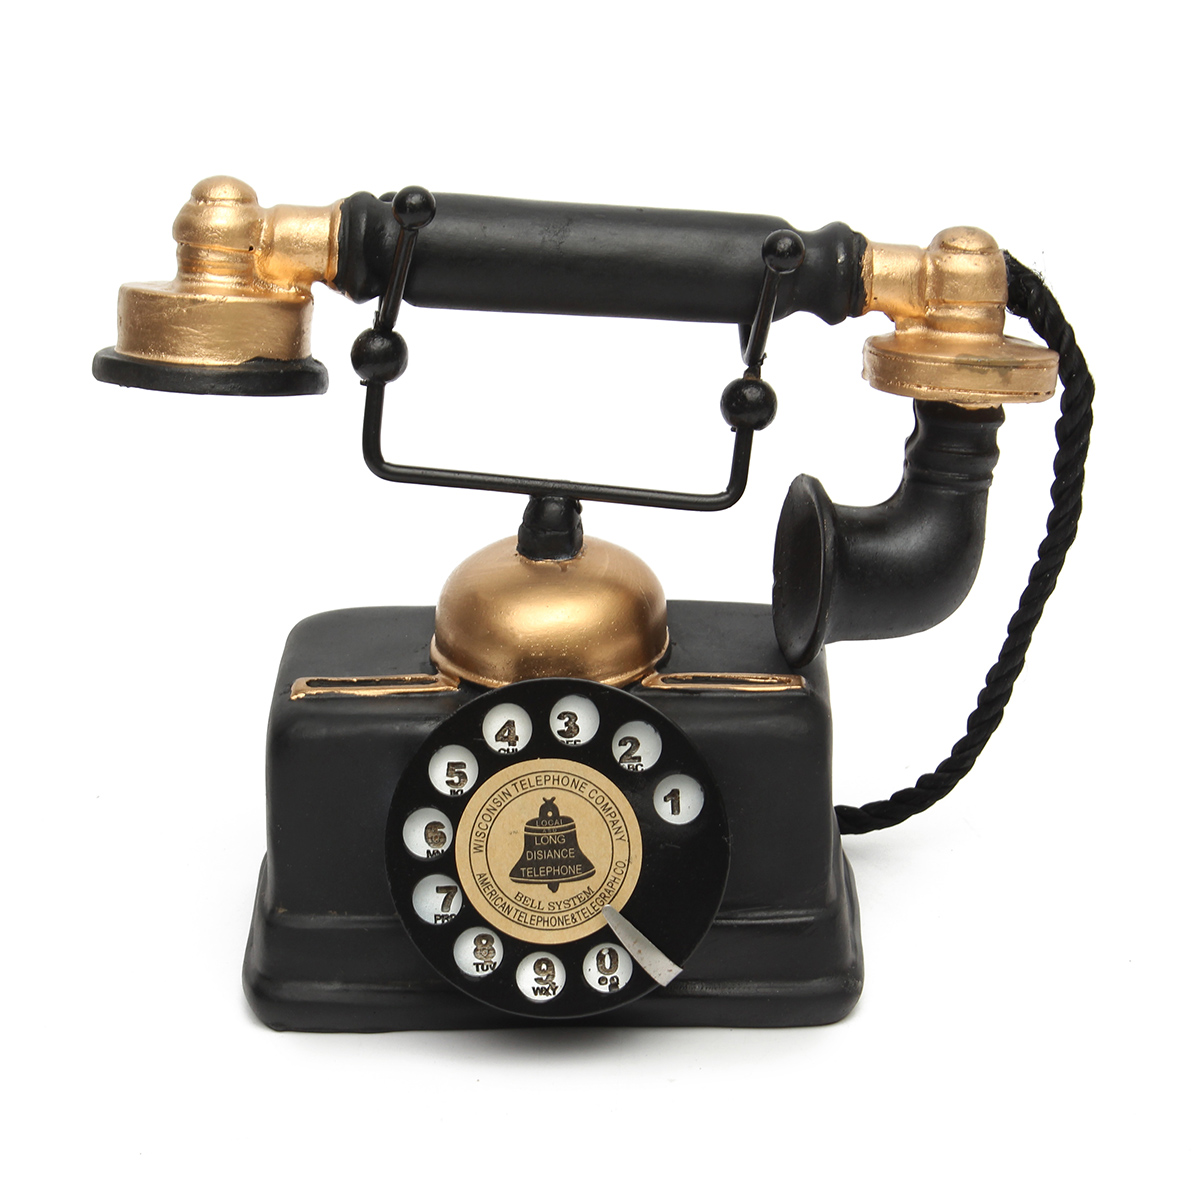 

Intage Rotary Landline Telephone Decor Statue Artist Antique Phone Figurine Decor Model for Home Desk Decoration Holiday Gifts